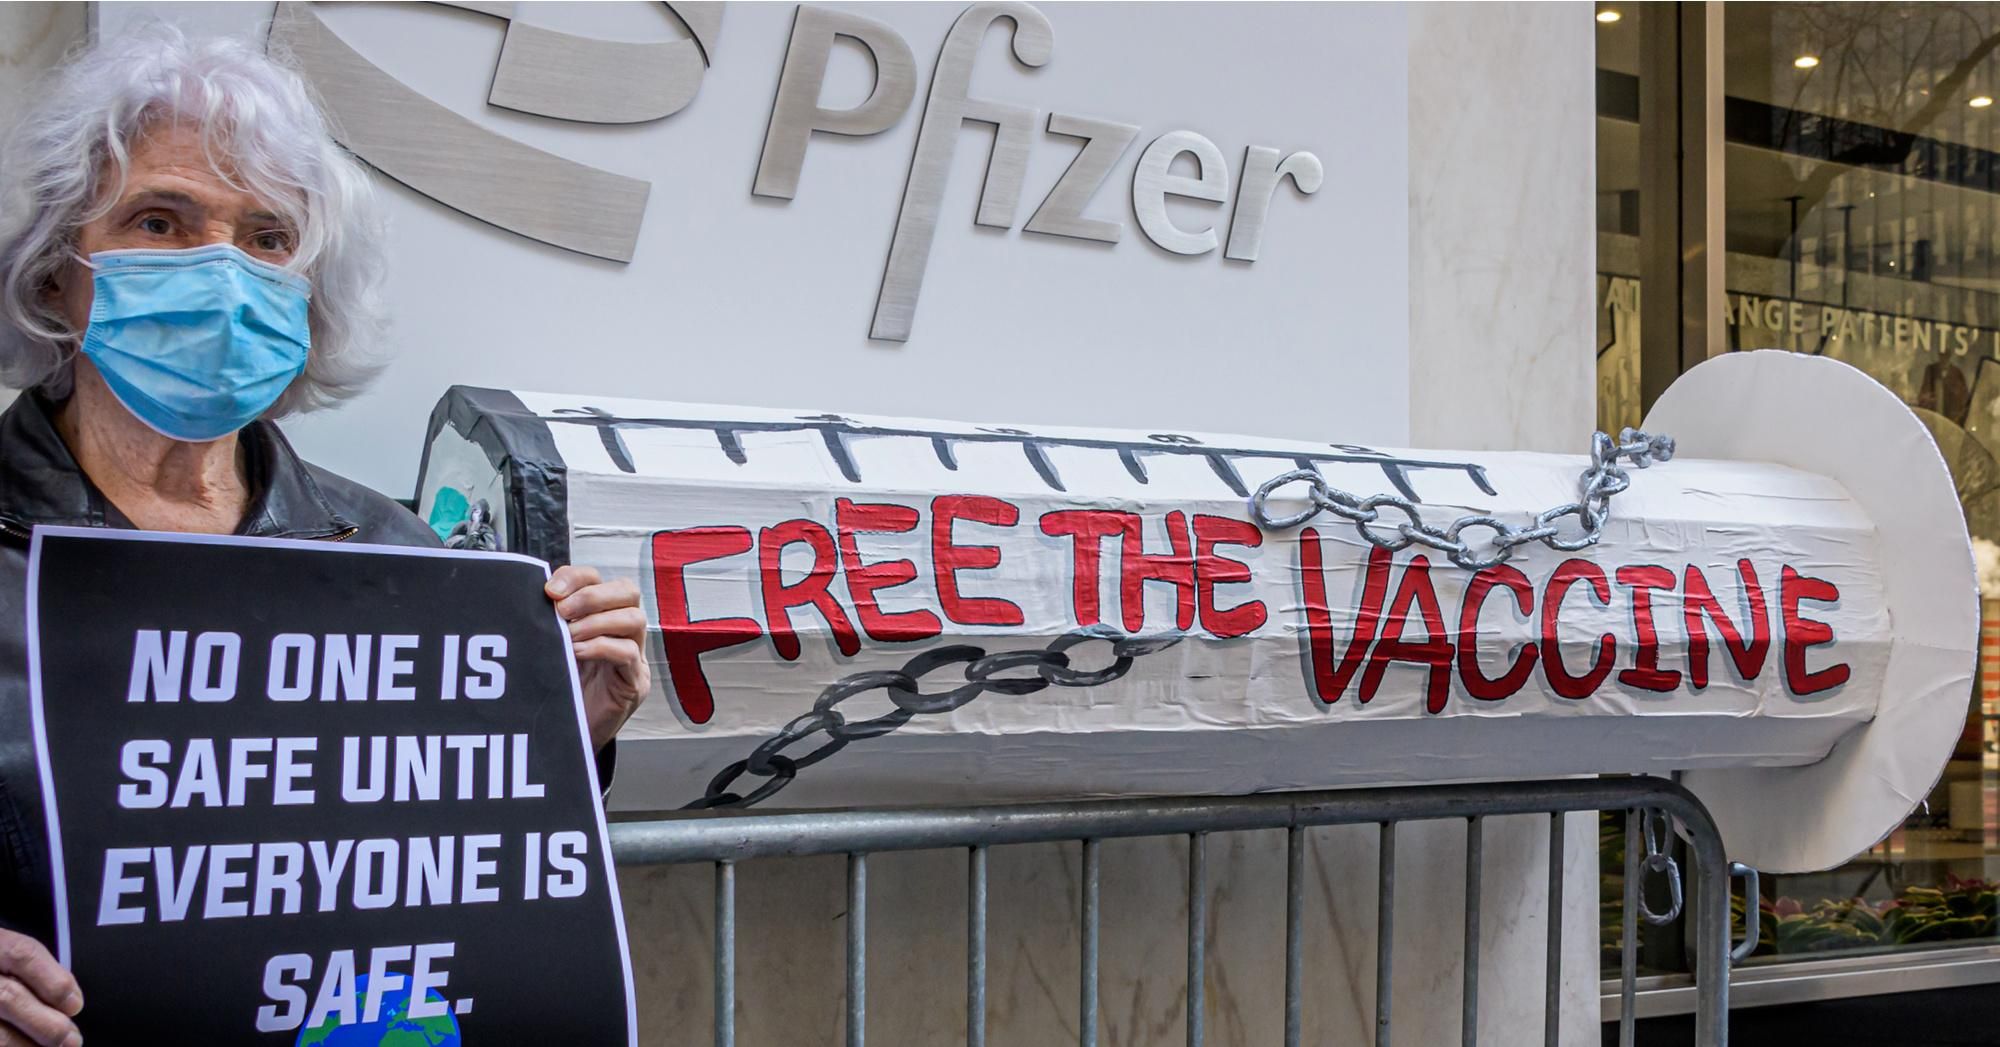 A woman demands Pfizer "free the vaccine" at a March 11, 2021 demonstration outside the company's world headquarters in New York City. (Photo: Erik McGregor/LightRocket via Getty Images)